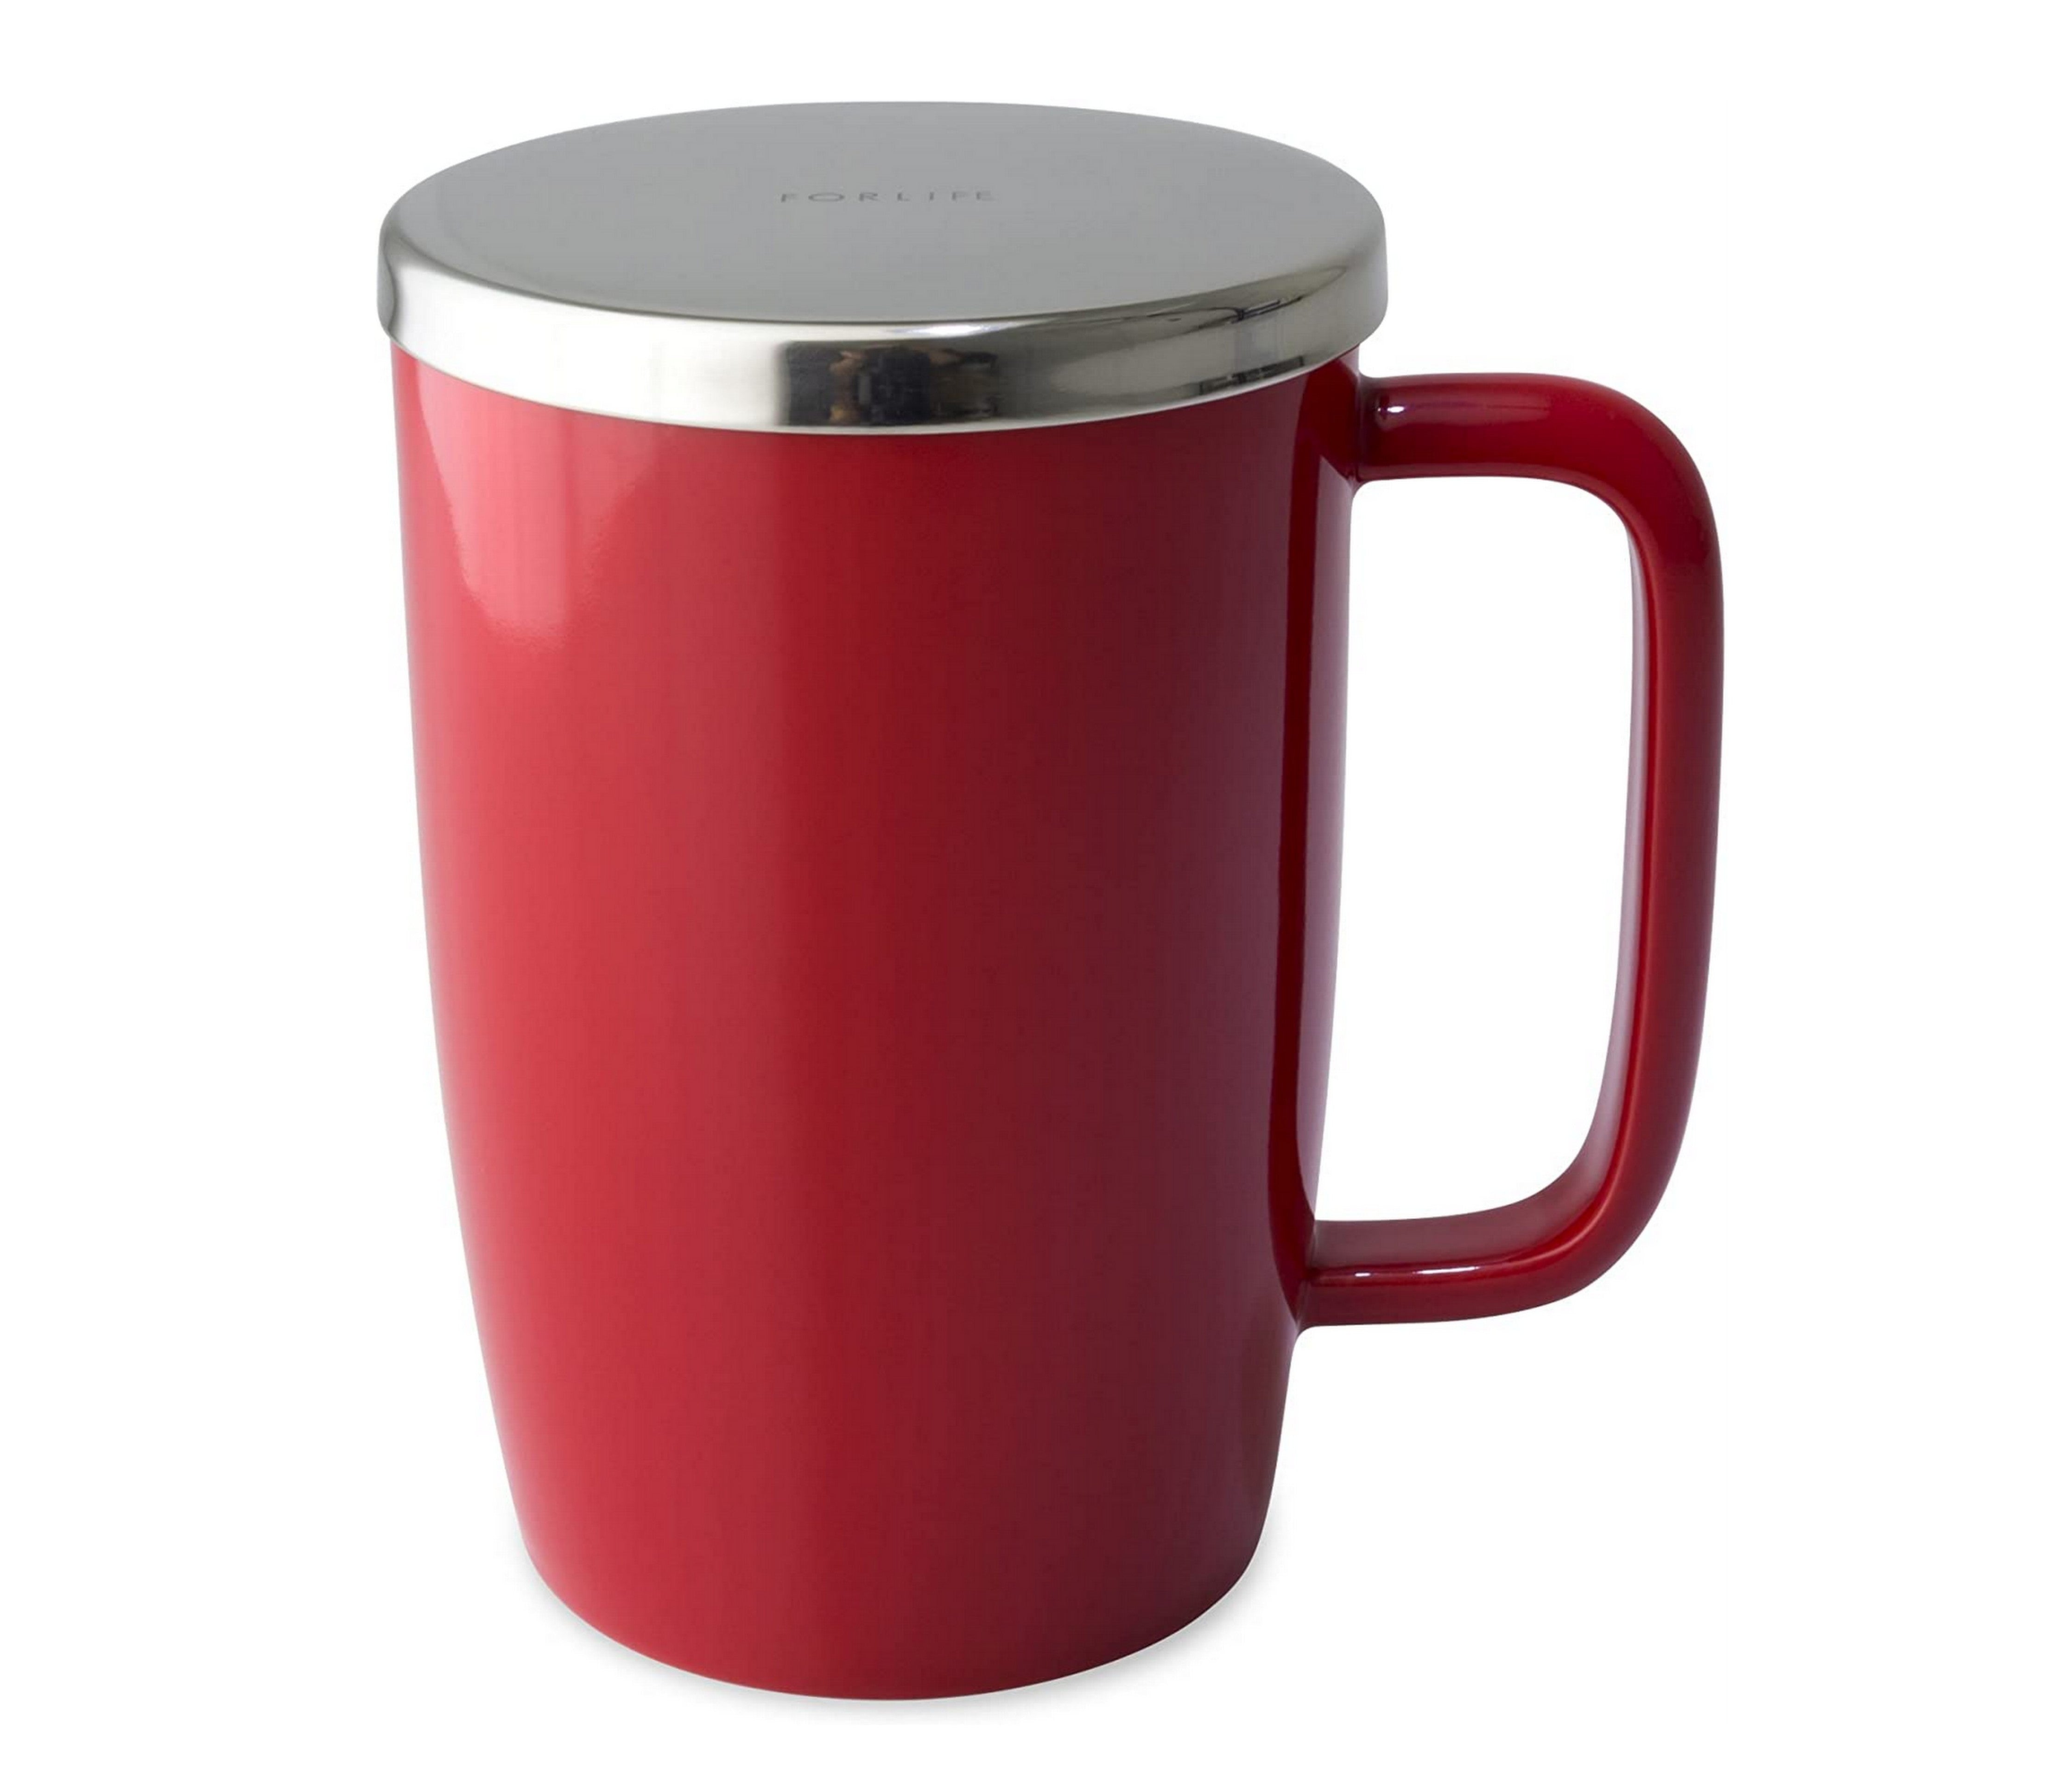 FORLIFE Curve Tall Tea Mug with Infuser and Lid 15 Ounces, Red